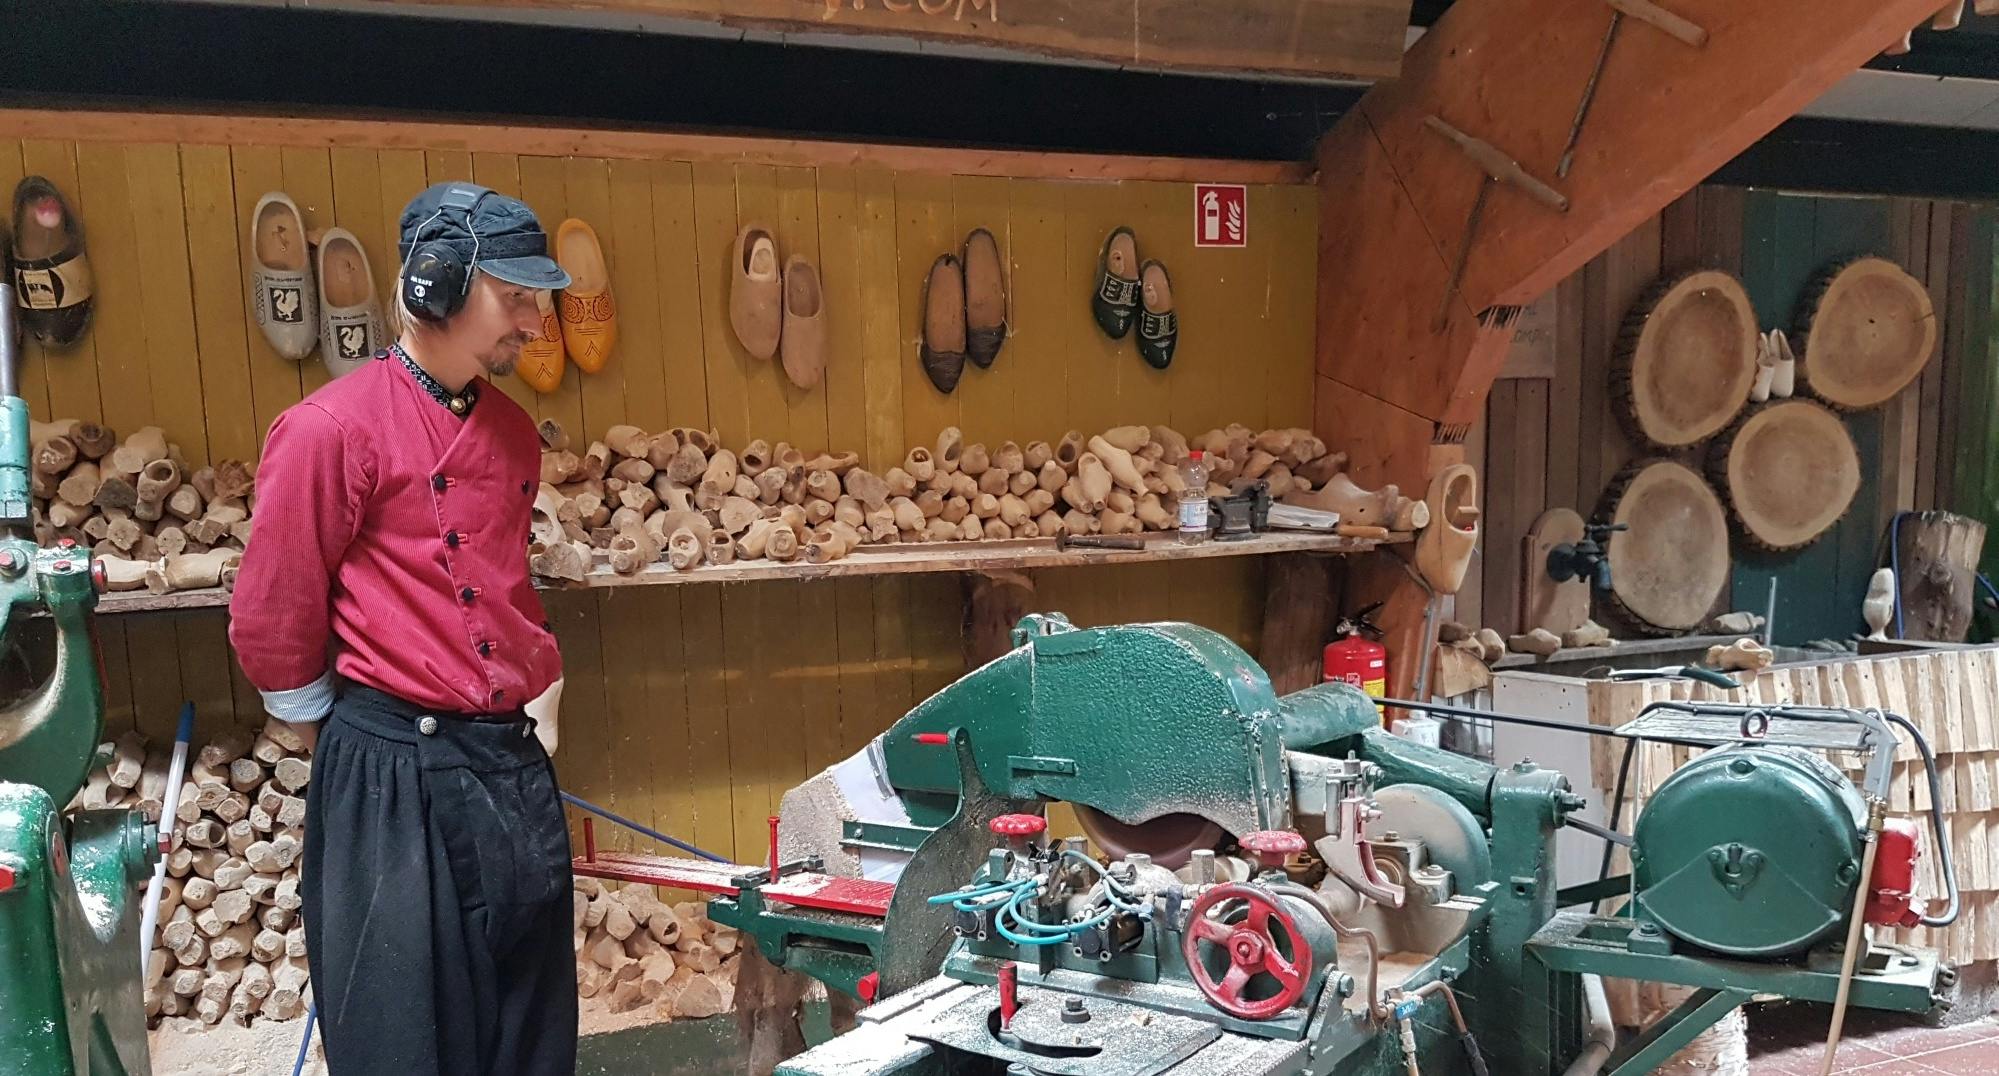 Simonehoeve Cheese Farm and Clog Factory tour with Dutch pastries Musement